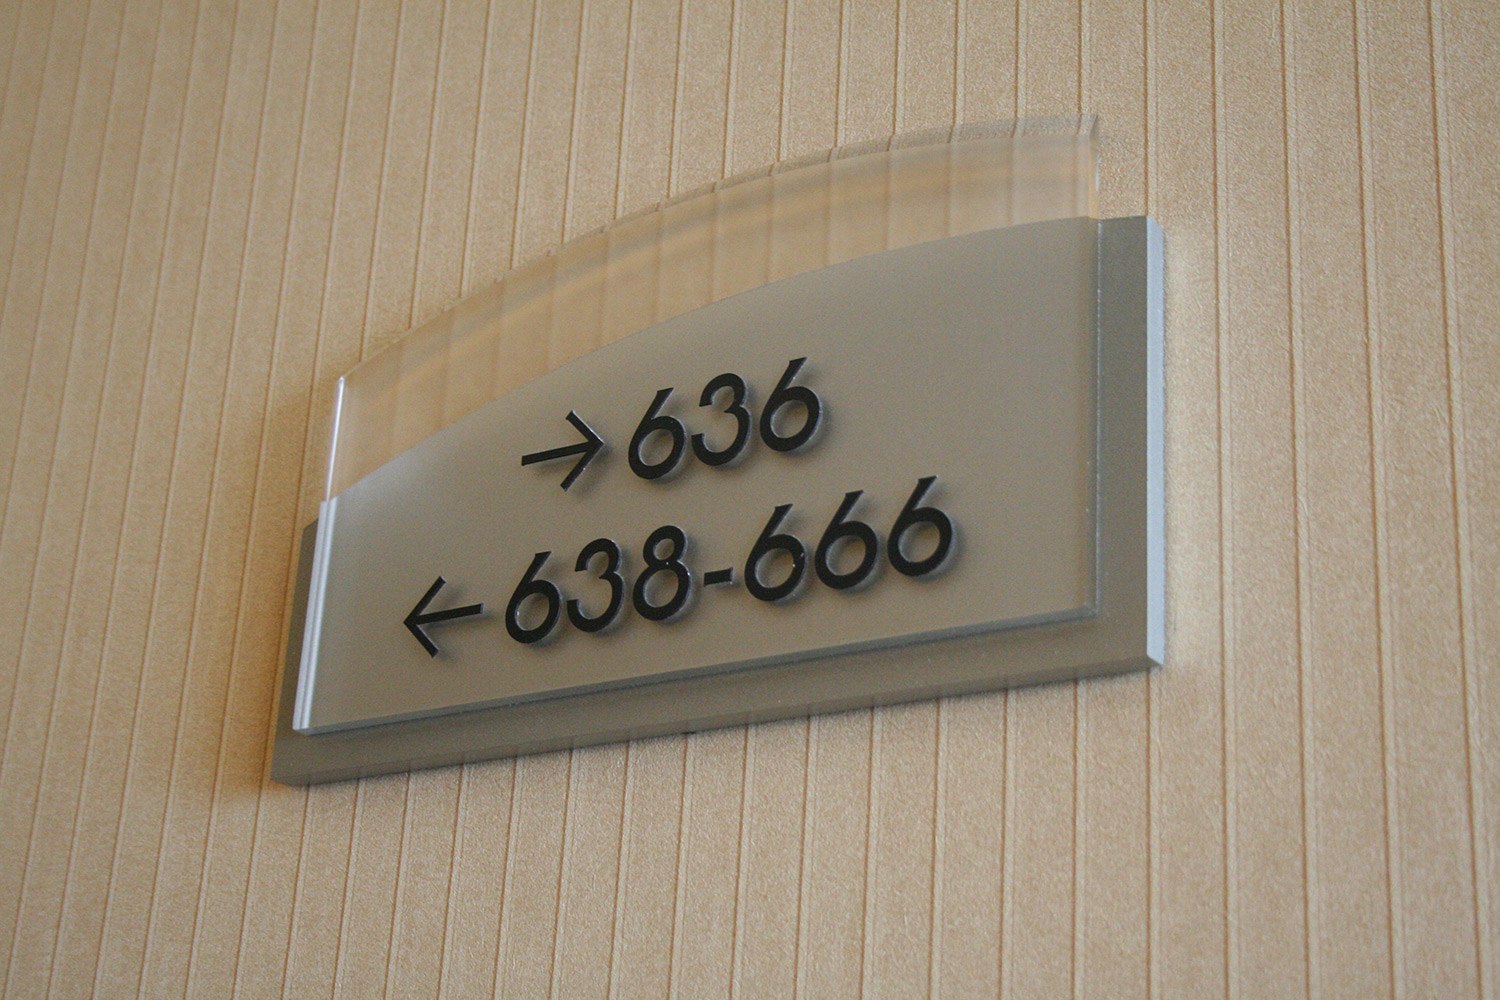 AS_Hilton-Room-Finding-Sign-2_12'08